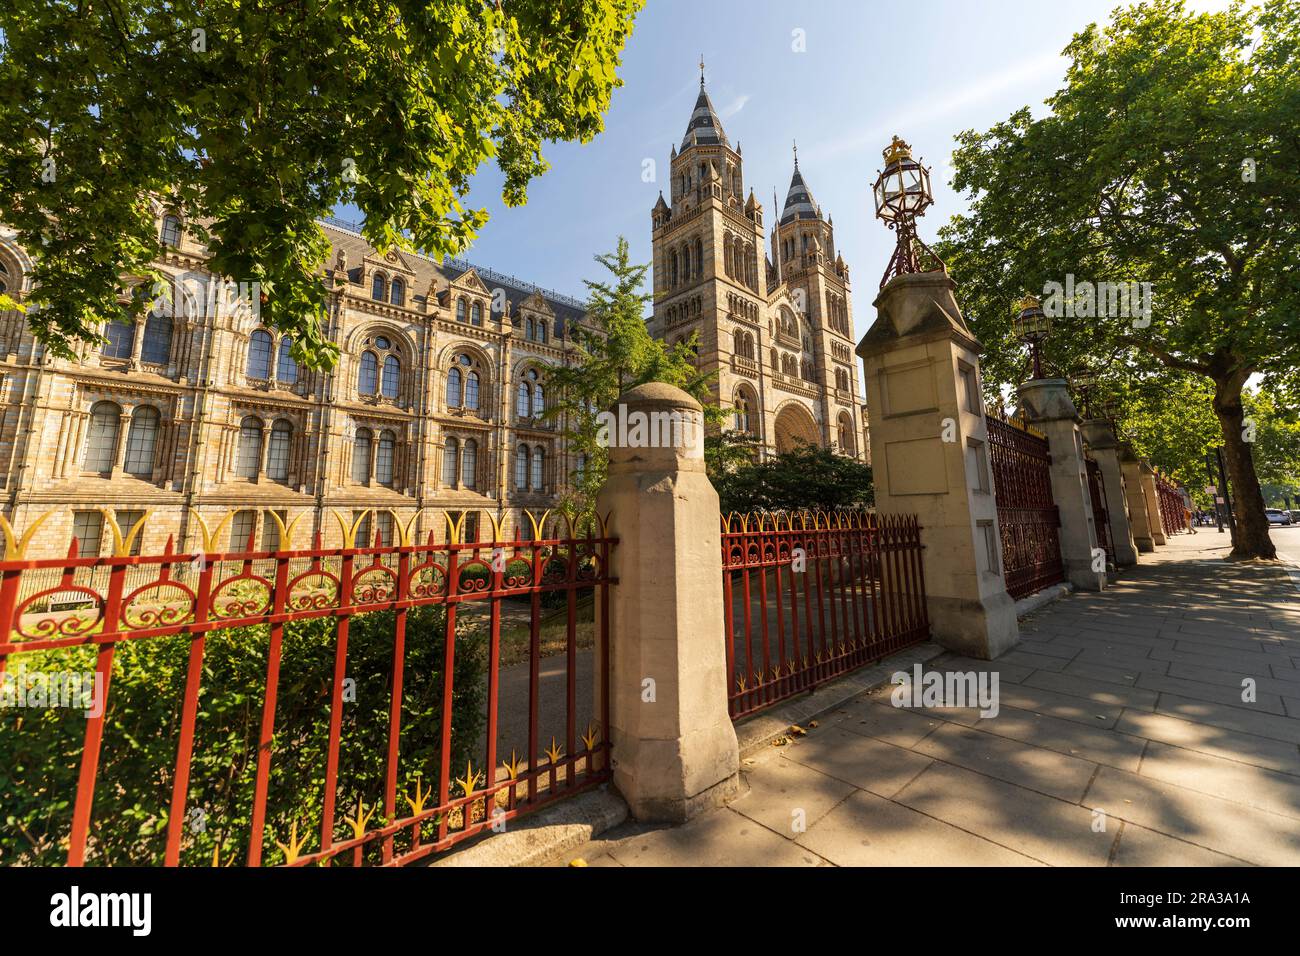 The London Natural History Museum in Kensington. A world-class museum with gothic architecture, Dippy the dinosaur bones and the blue whale skeleton. Stock Photo